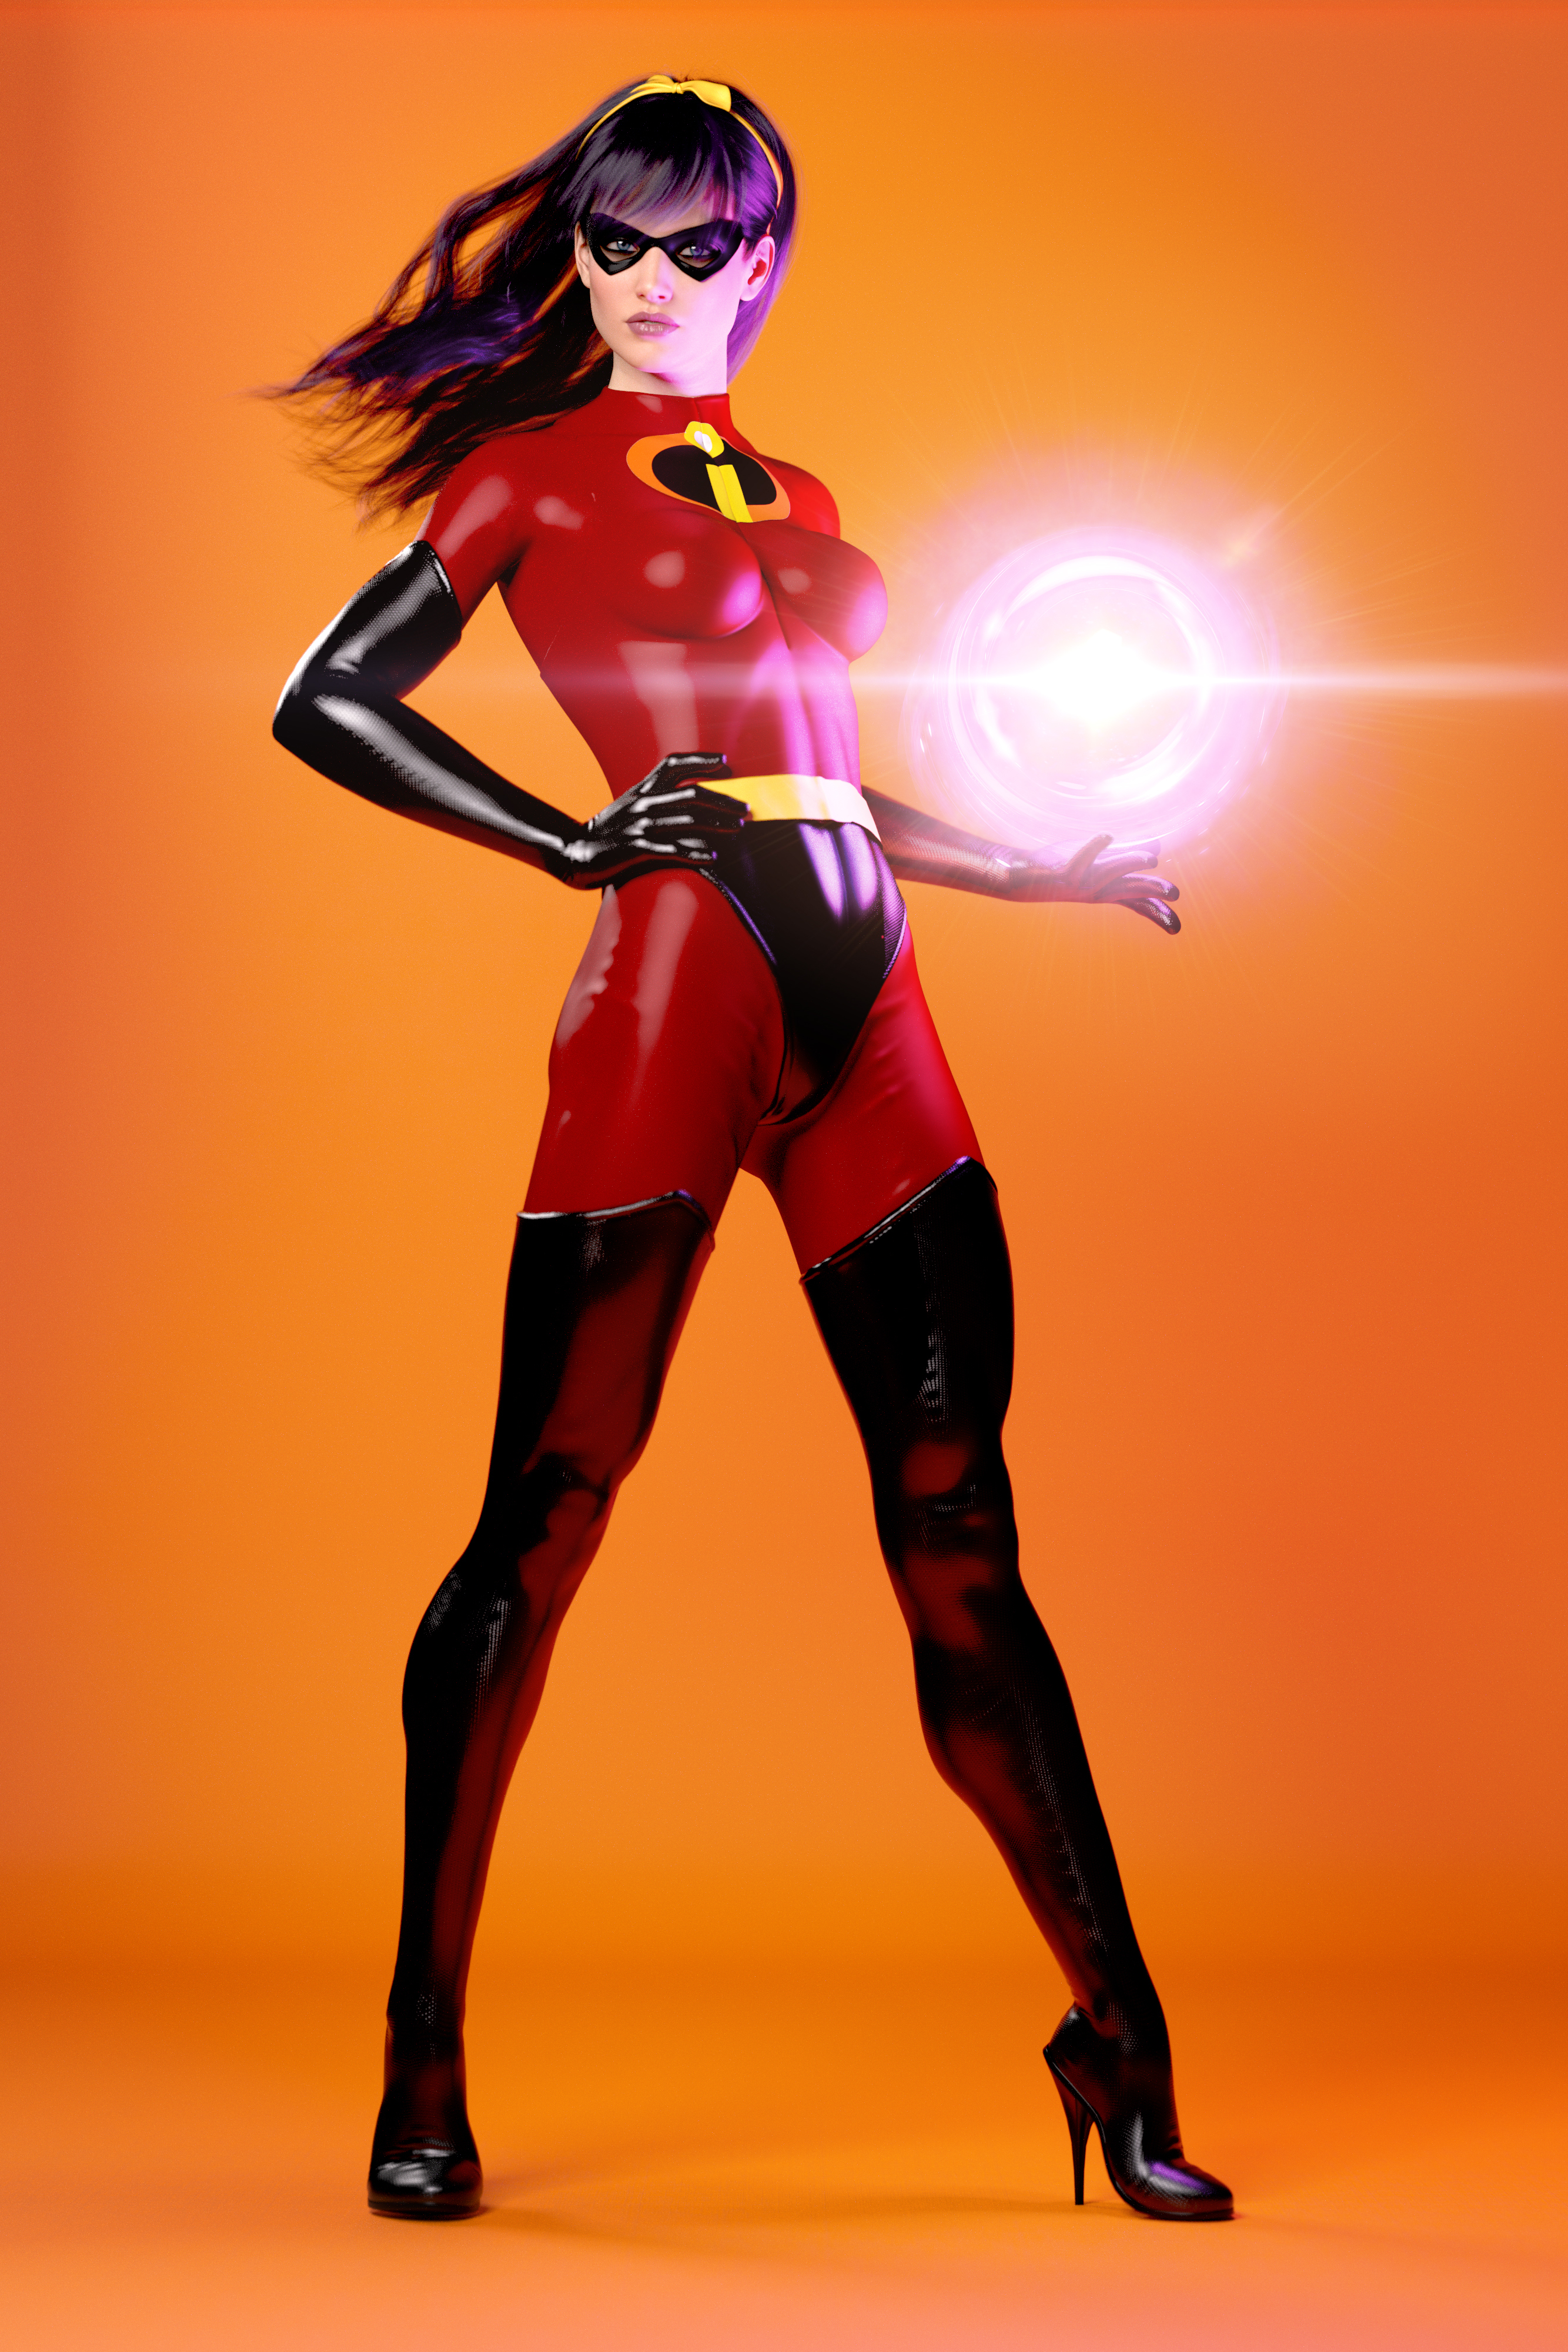 beth fincher add violet parr sexy photo